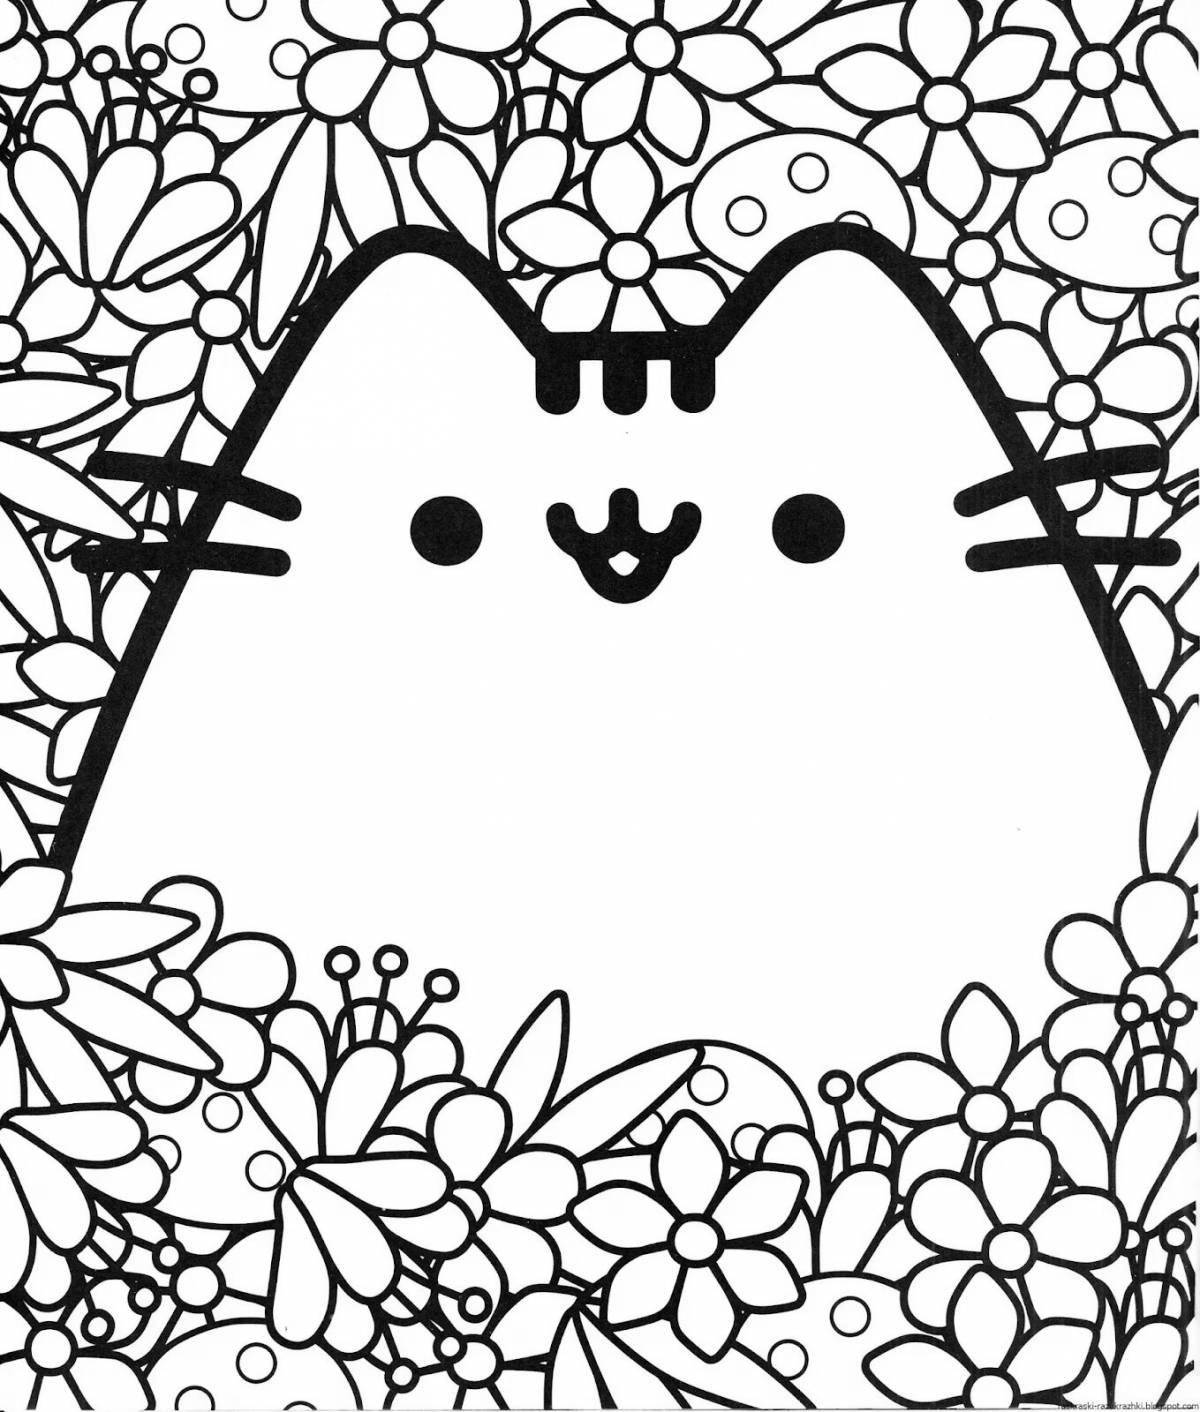 Snuggly cute cat coloring page